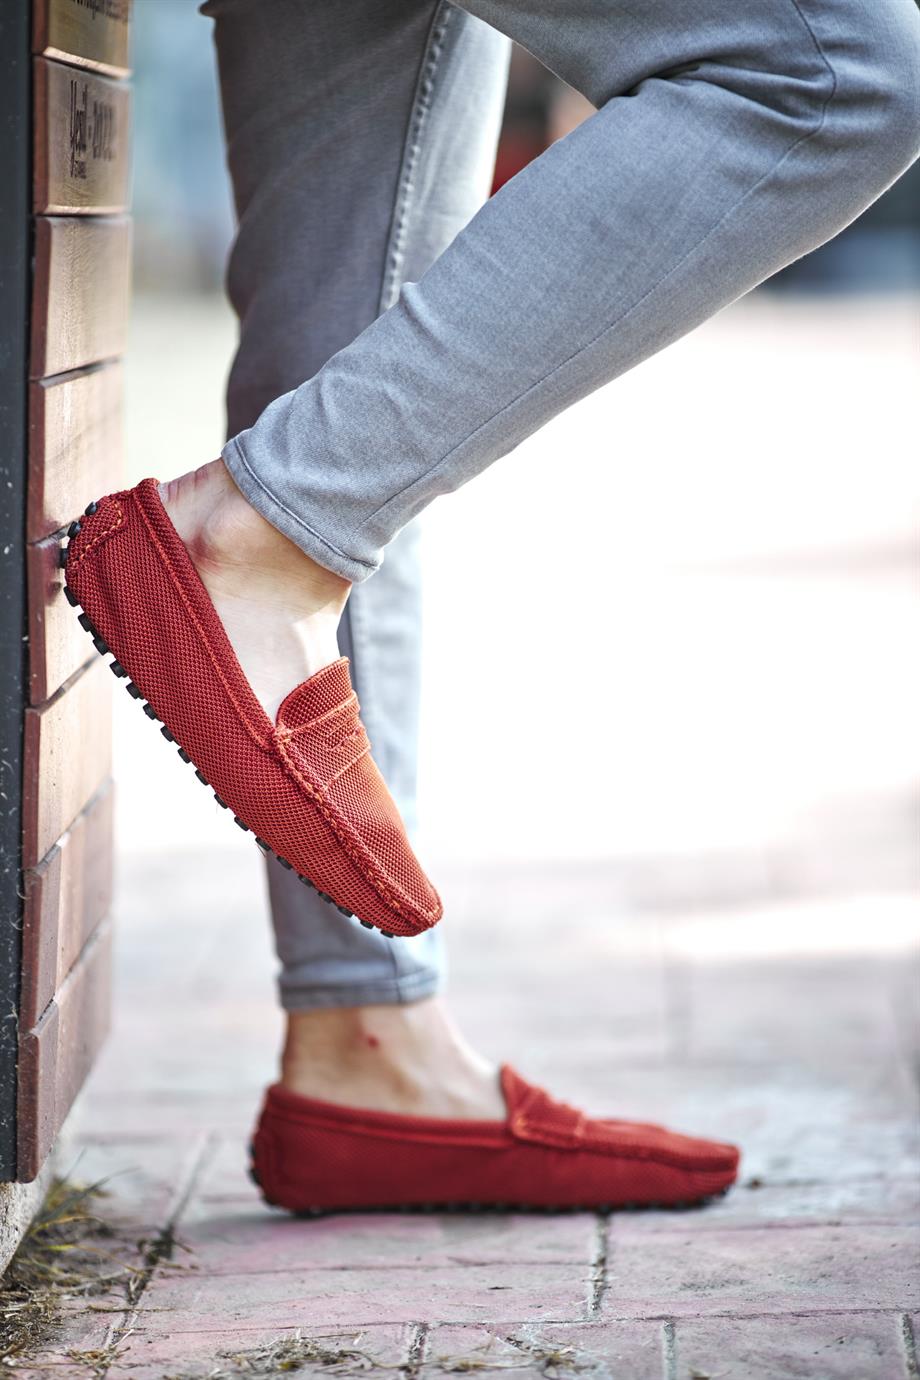 Men's Red Knitwear Driving Loafers